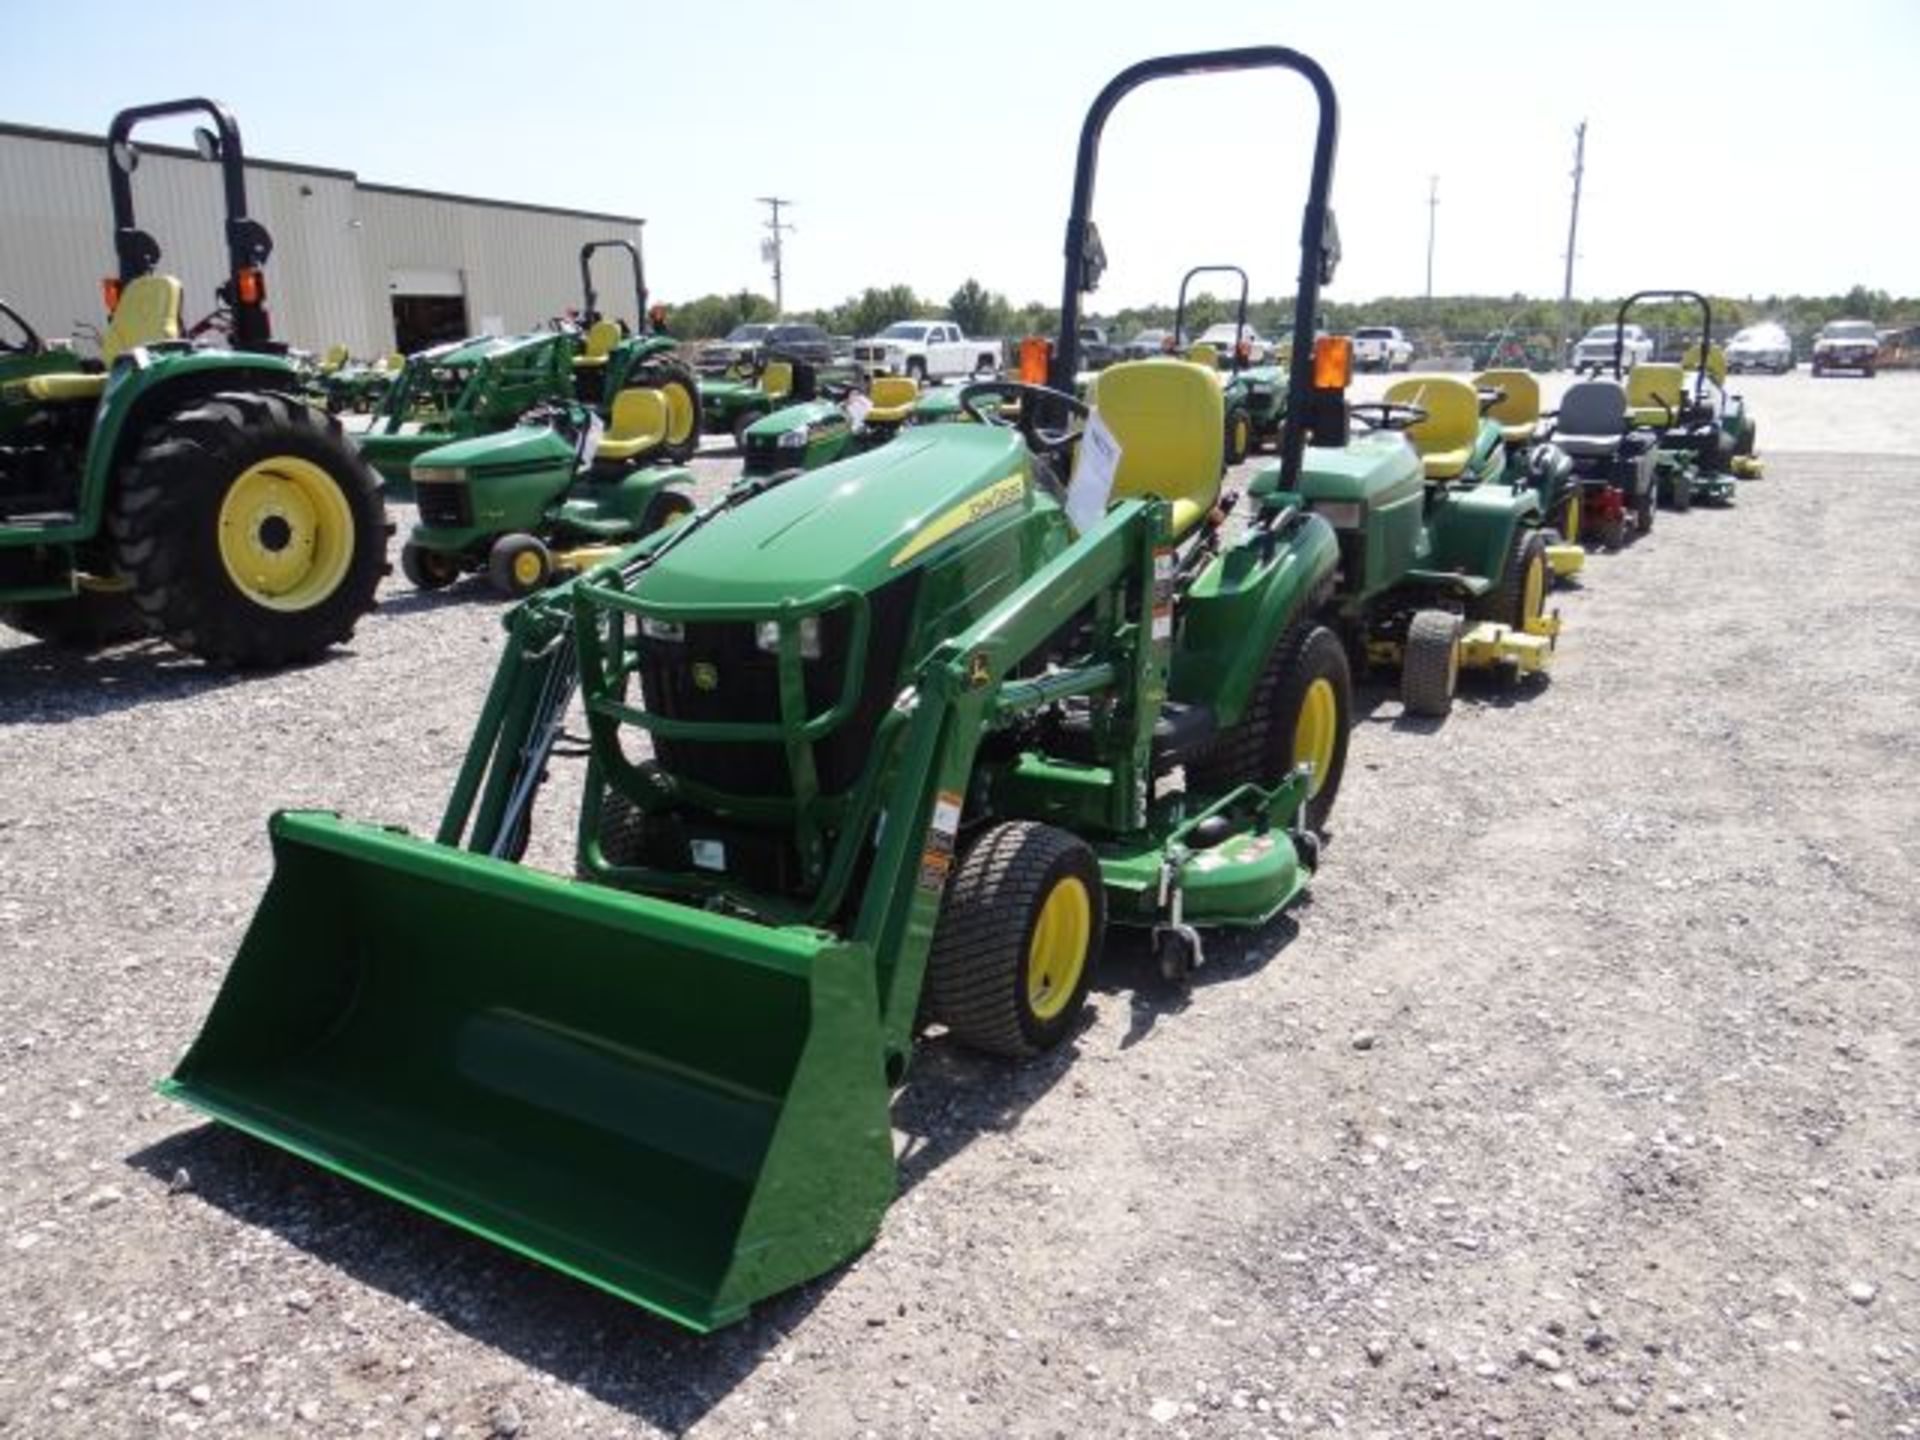 2016 JD 1023E Compact Tractor 5 hrs, 22hp, Yanmar, 2spd, Hydro, MFWD, R-4 Tires, Folding rops, STD - Image 2 of 3